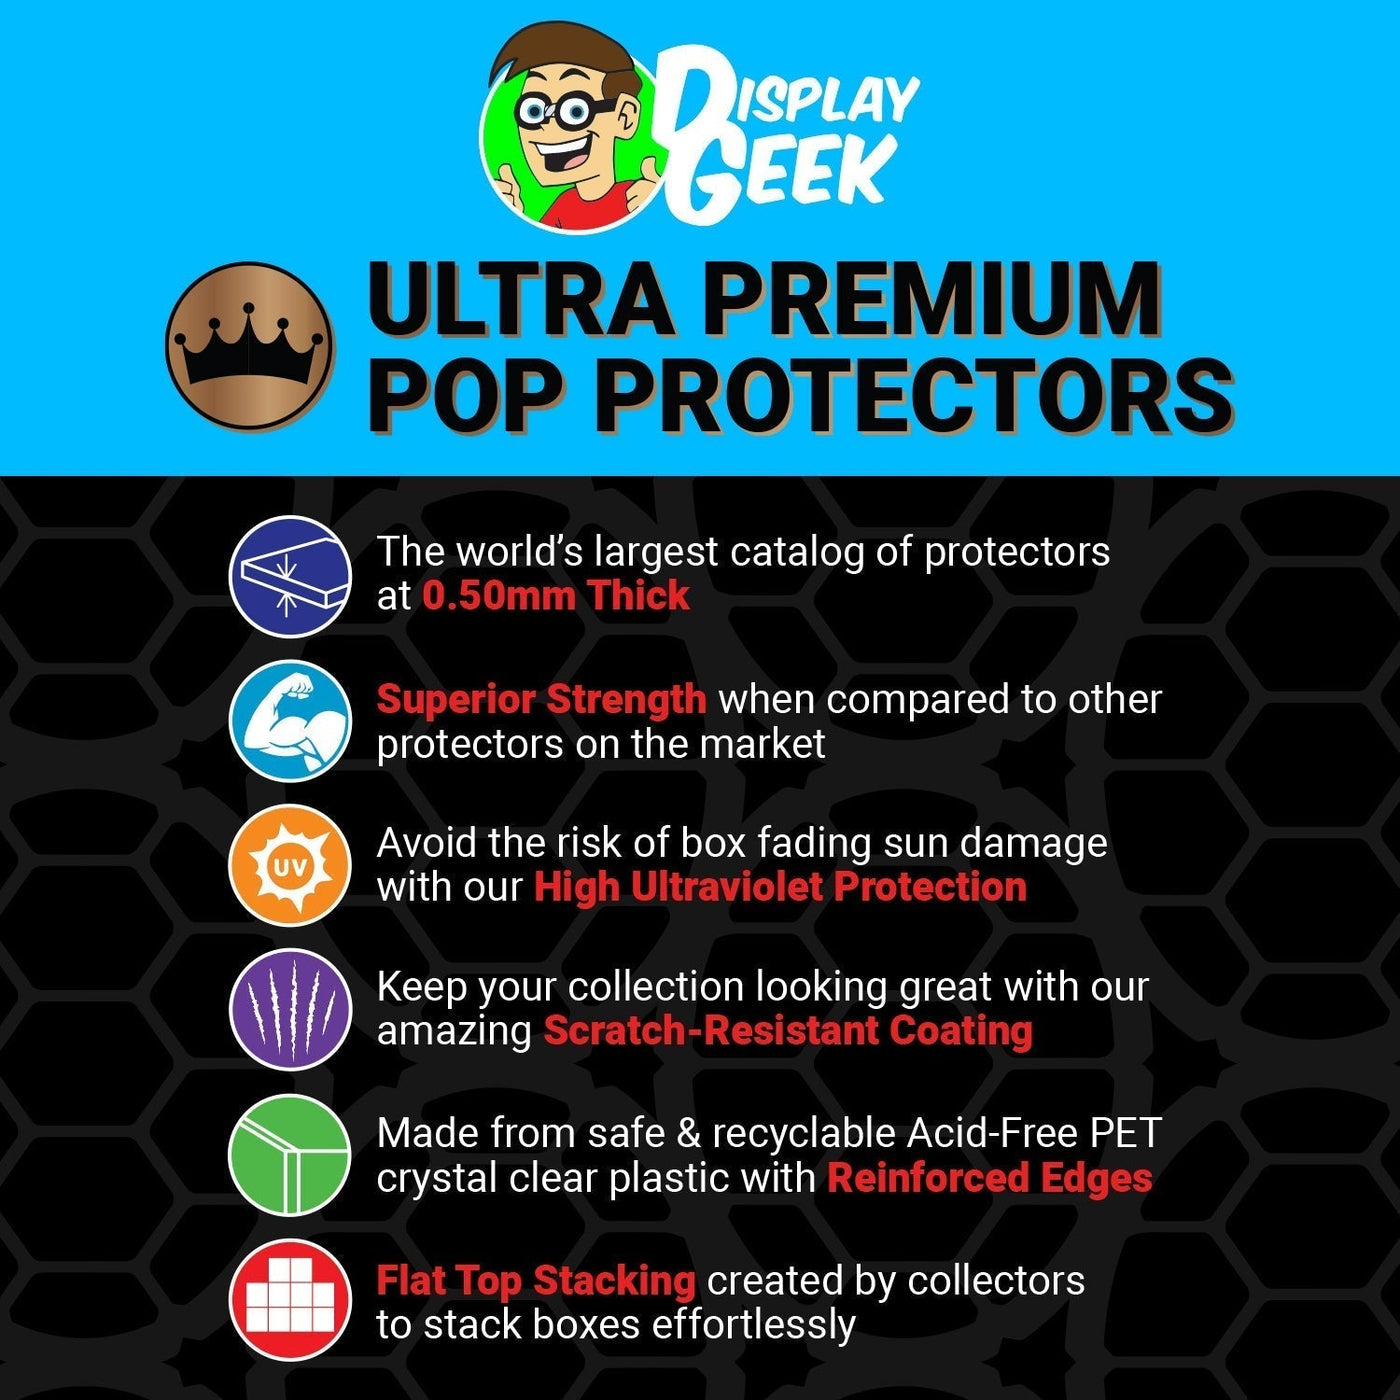 Pop Protector for Street Art Miles Morales NYCC #686 Funko Pop Deluxe on The Protector Guide App by Display Geek